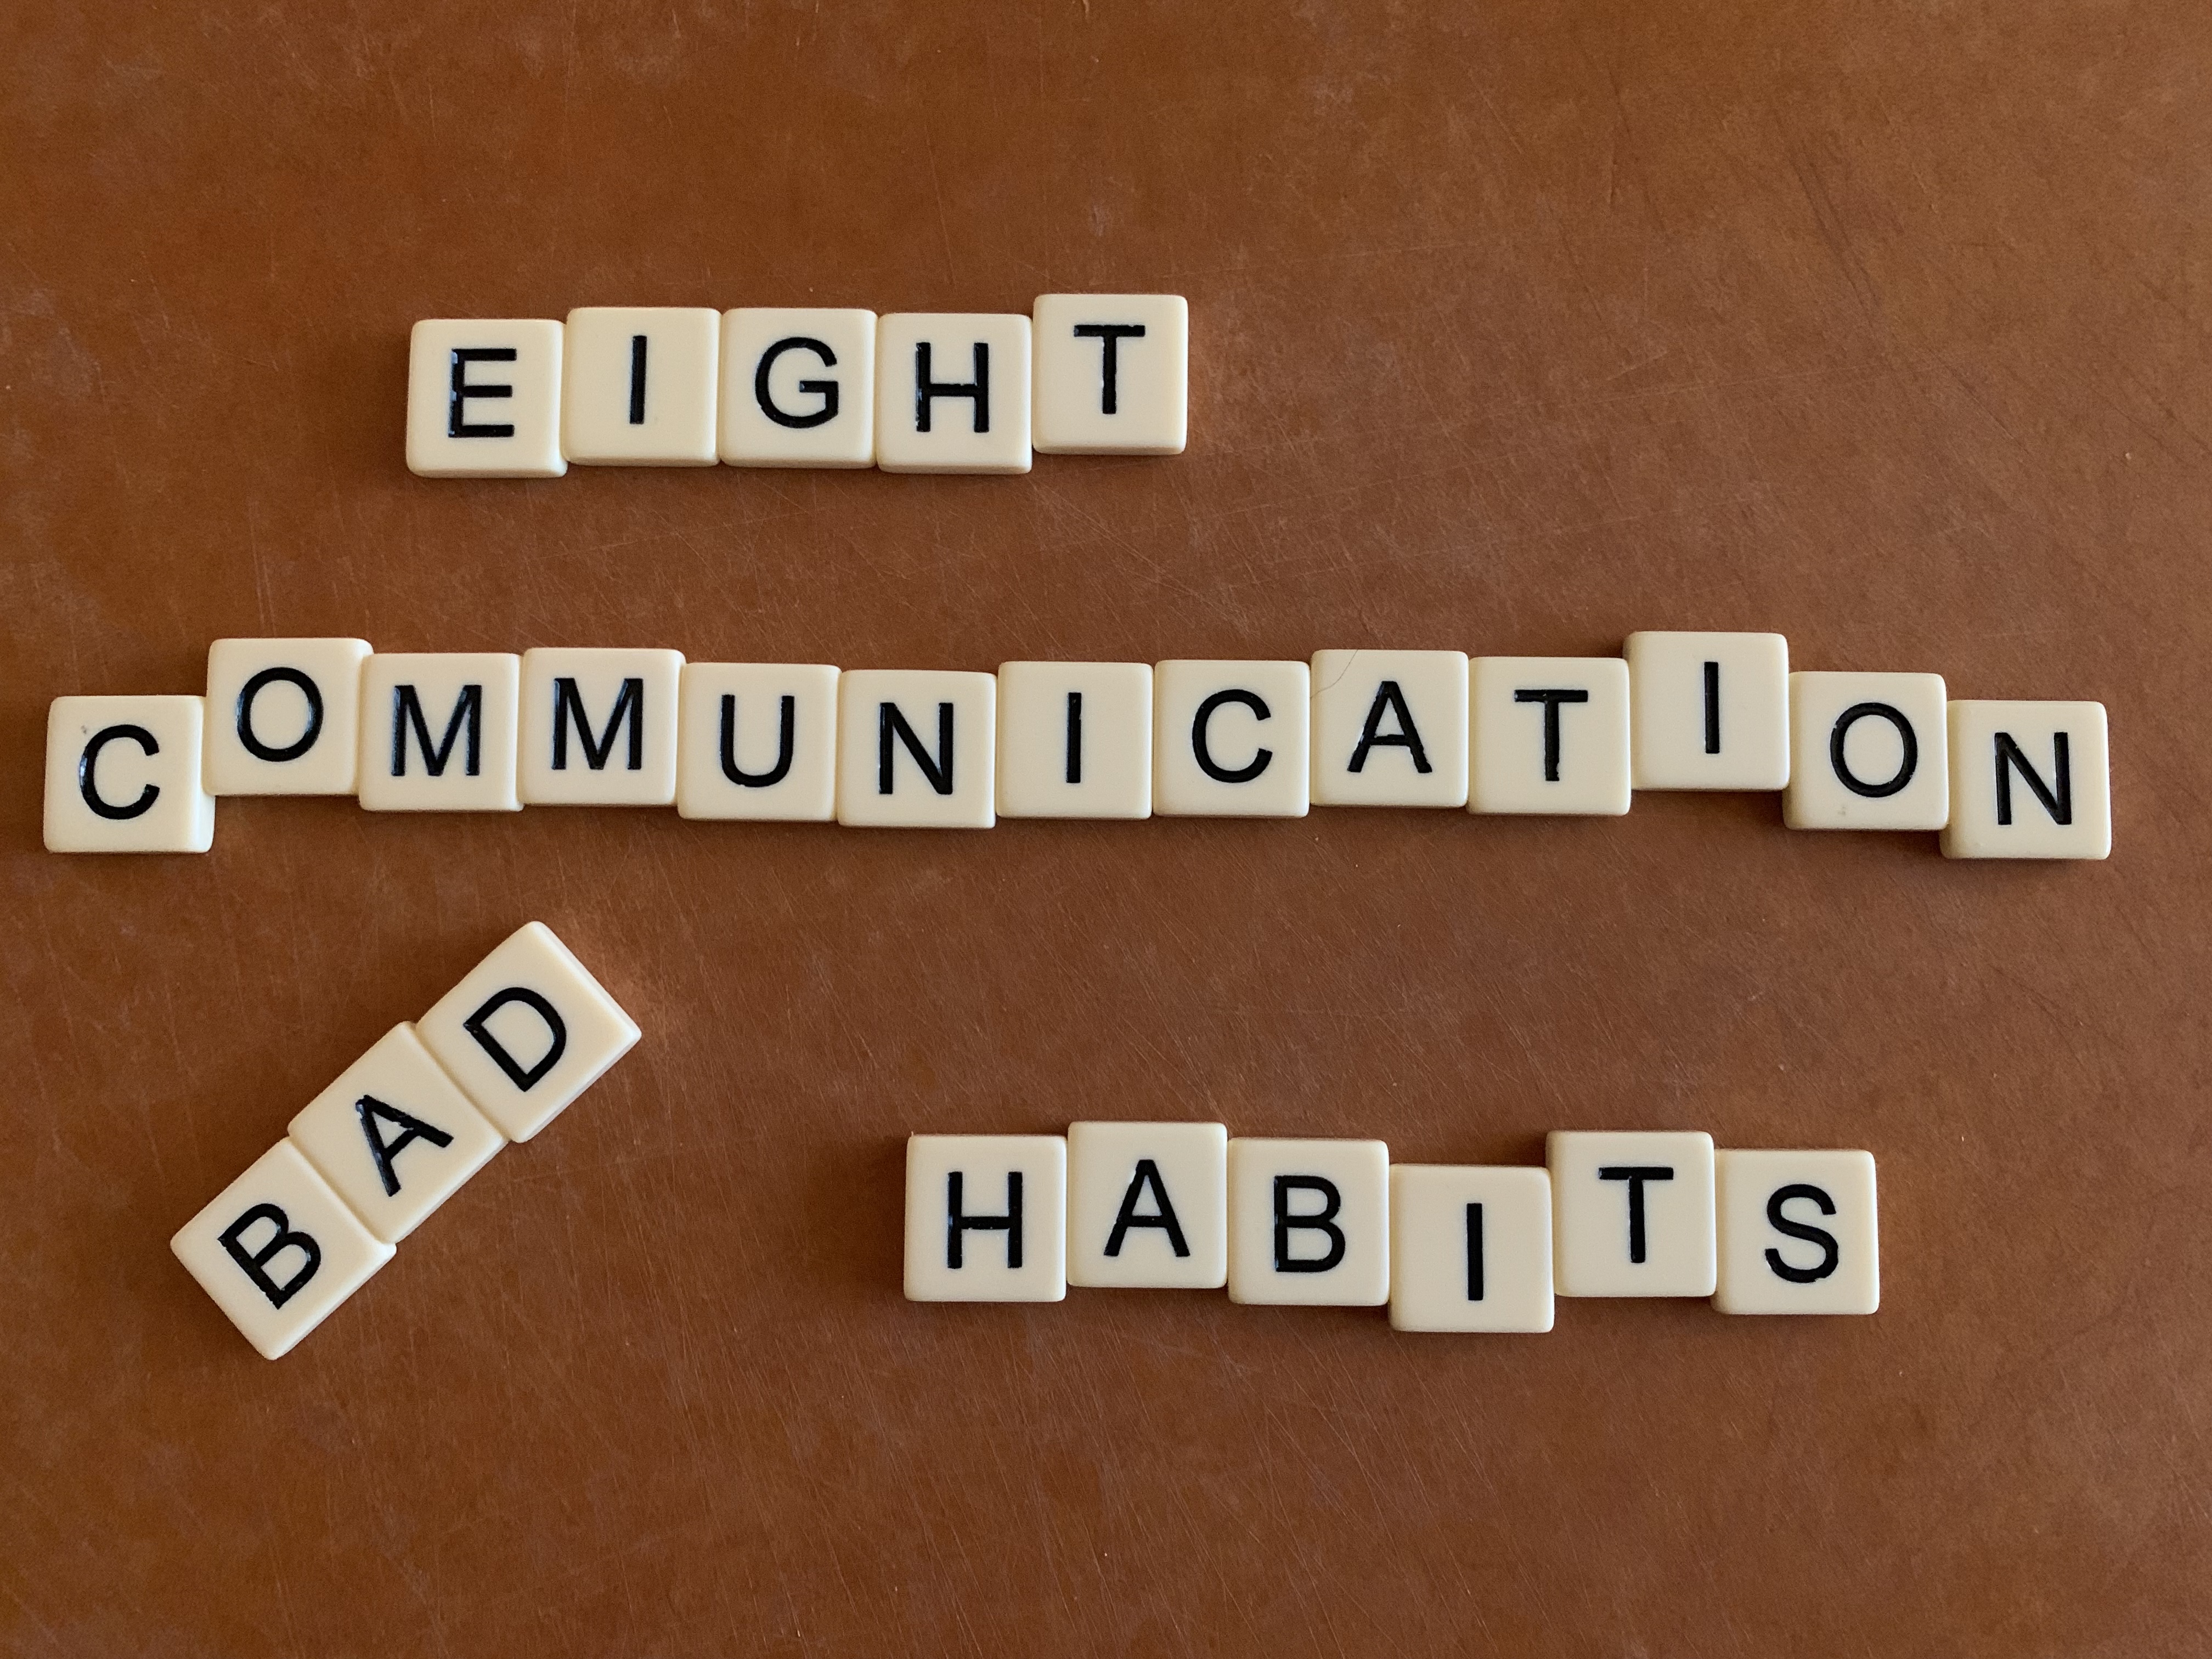 Scrabble-type tiles spelling out the words: eight communication bad habits, with the word bad at an angle